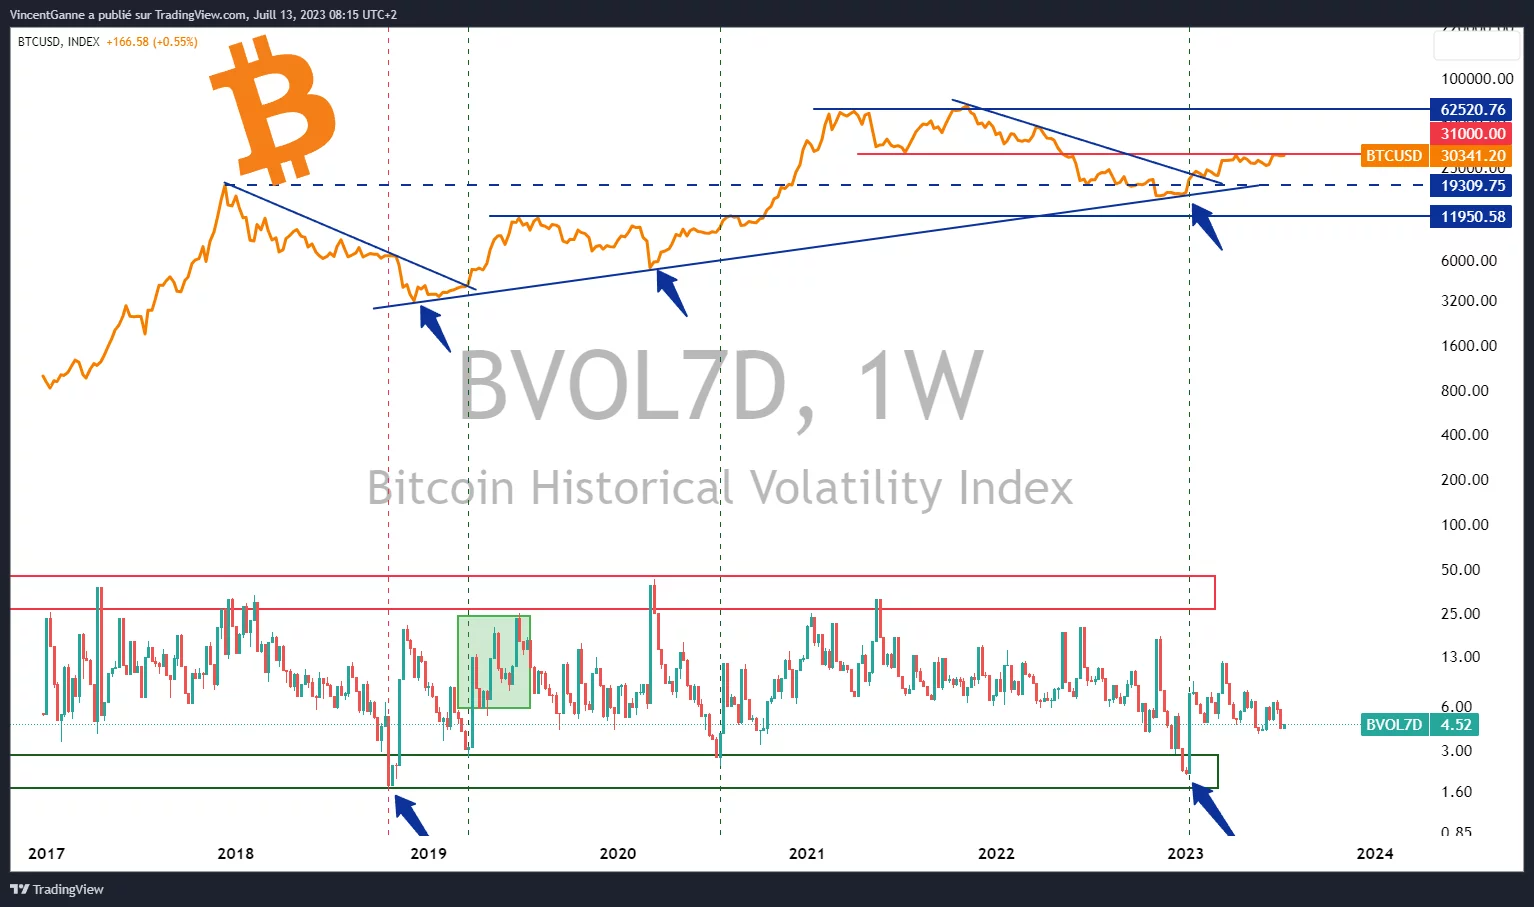 Bitcoin weekly closing price with measure of short-term volatility